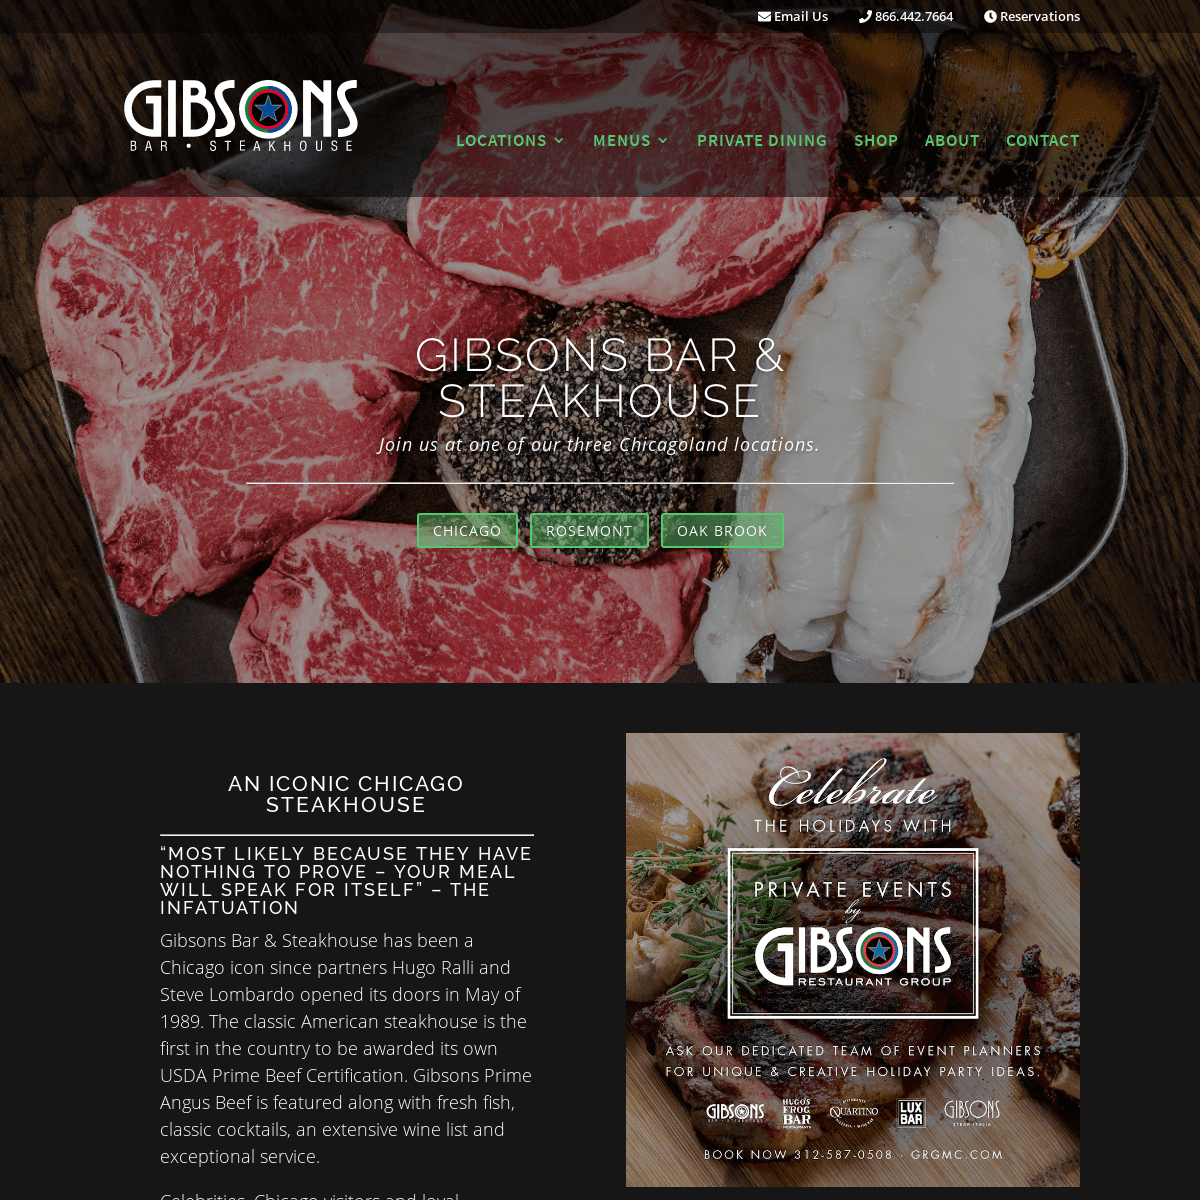 A complete backup of gibsonssteakhouse.com